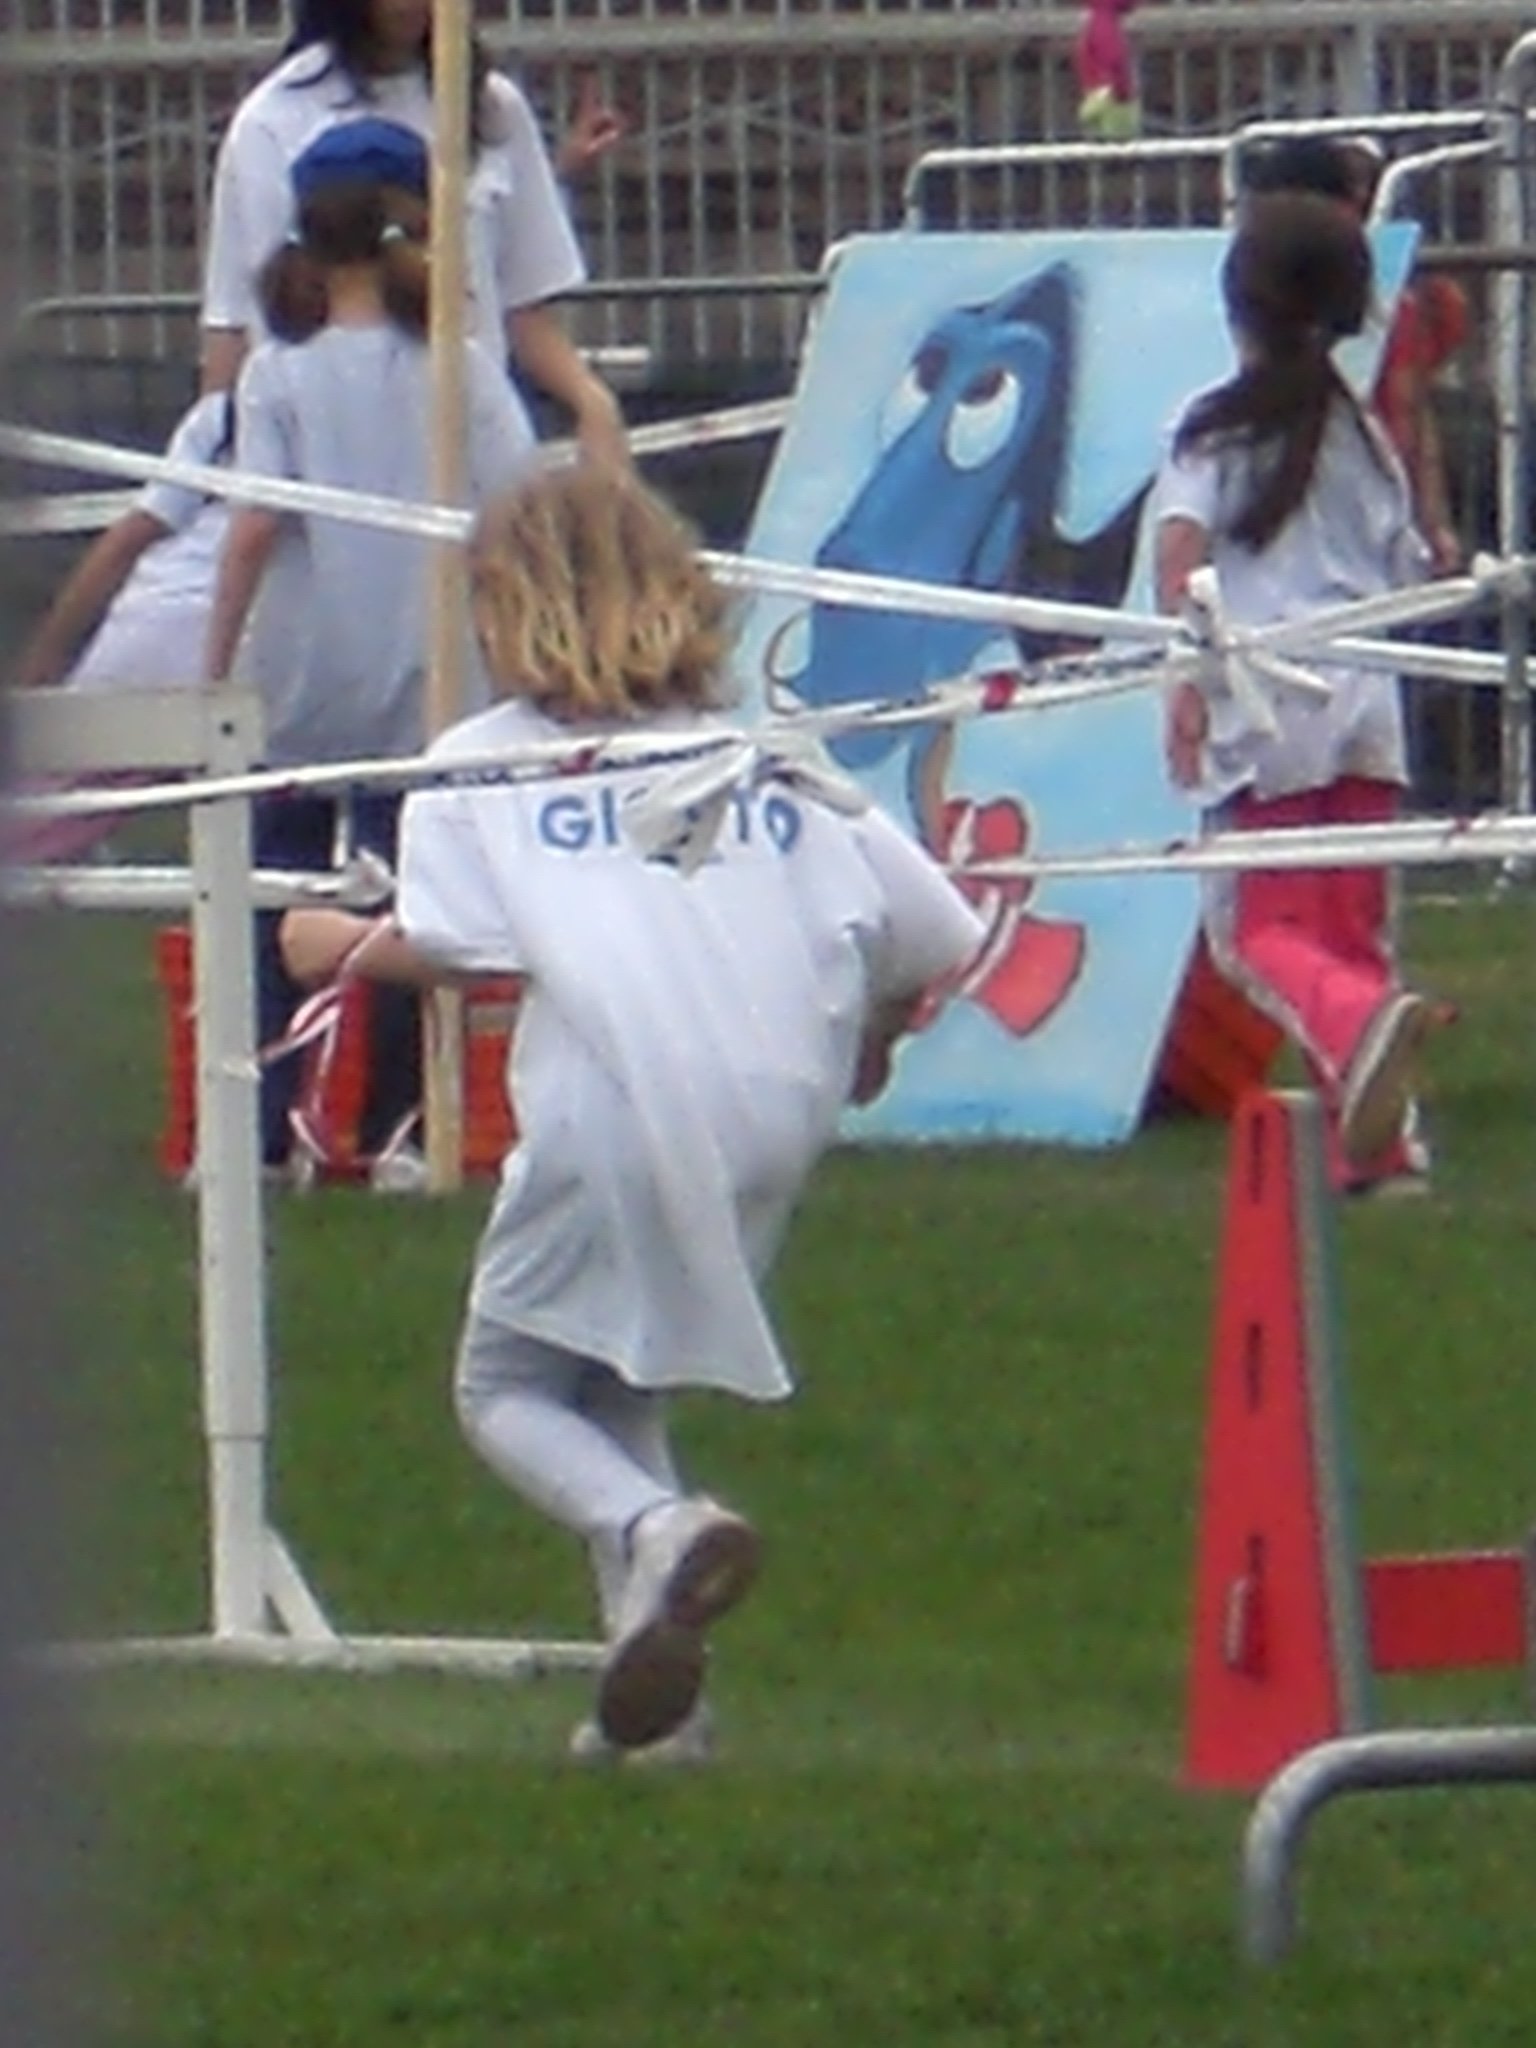 the young soccer player is jumping off of a pole